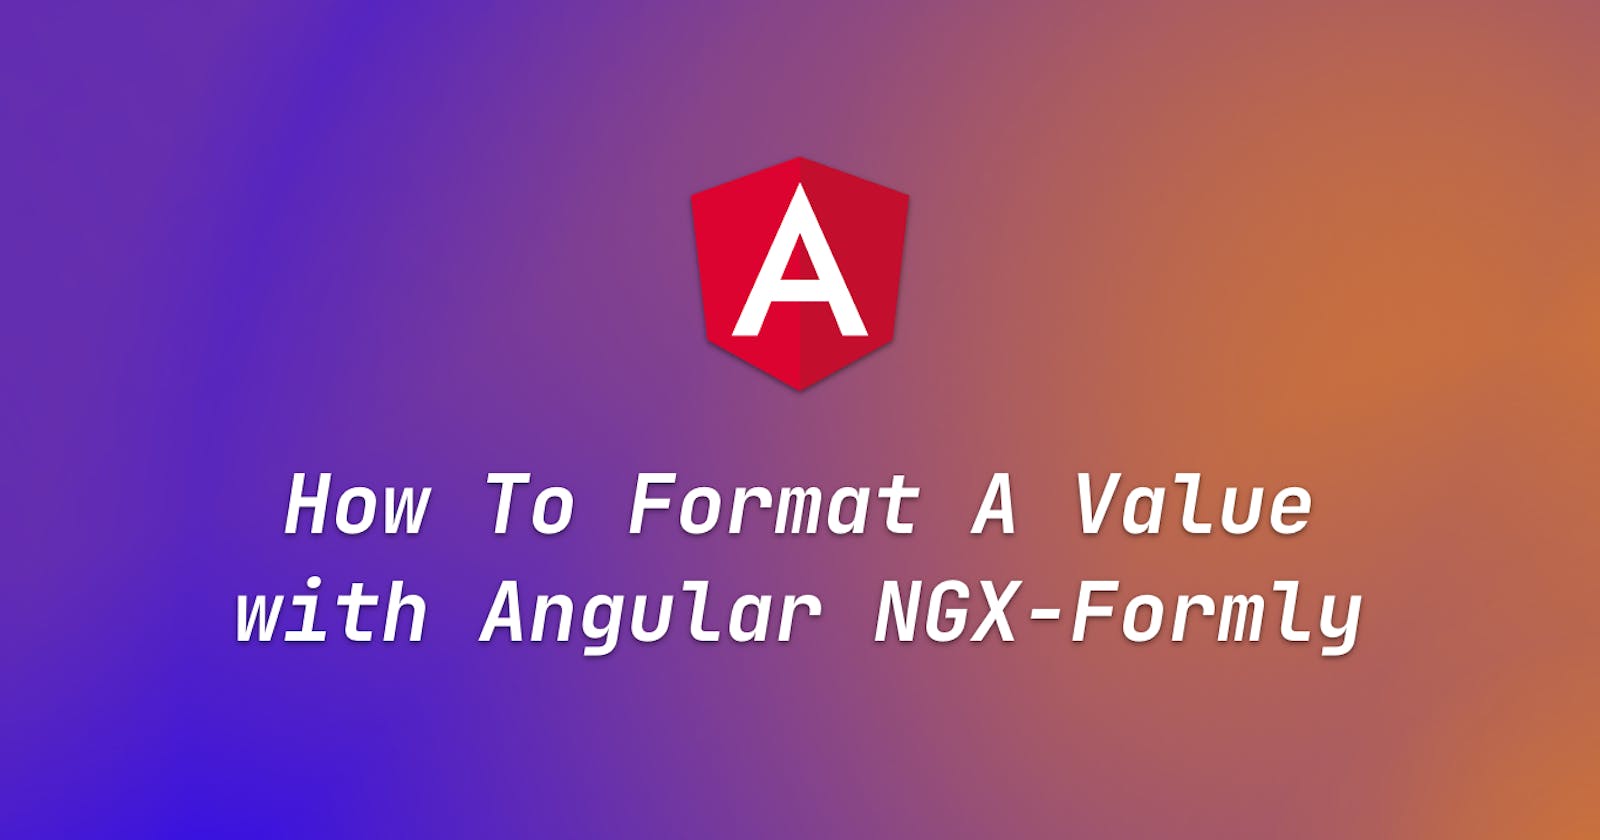 How To Format A Value with Angular NGX-Formly